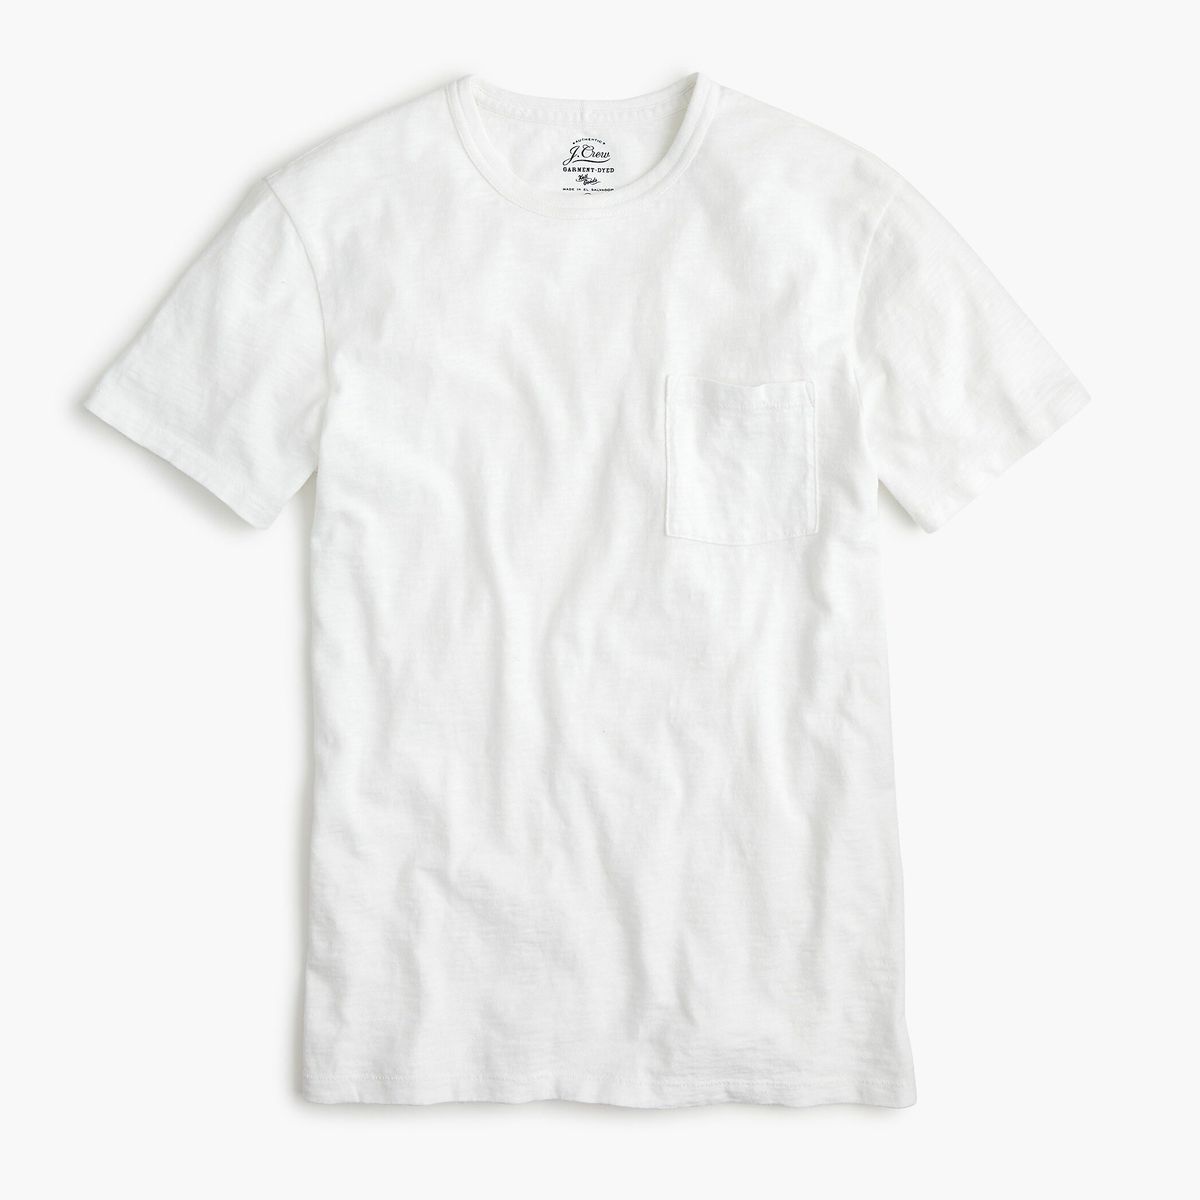 most expensive white t shirt